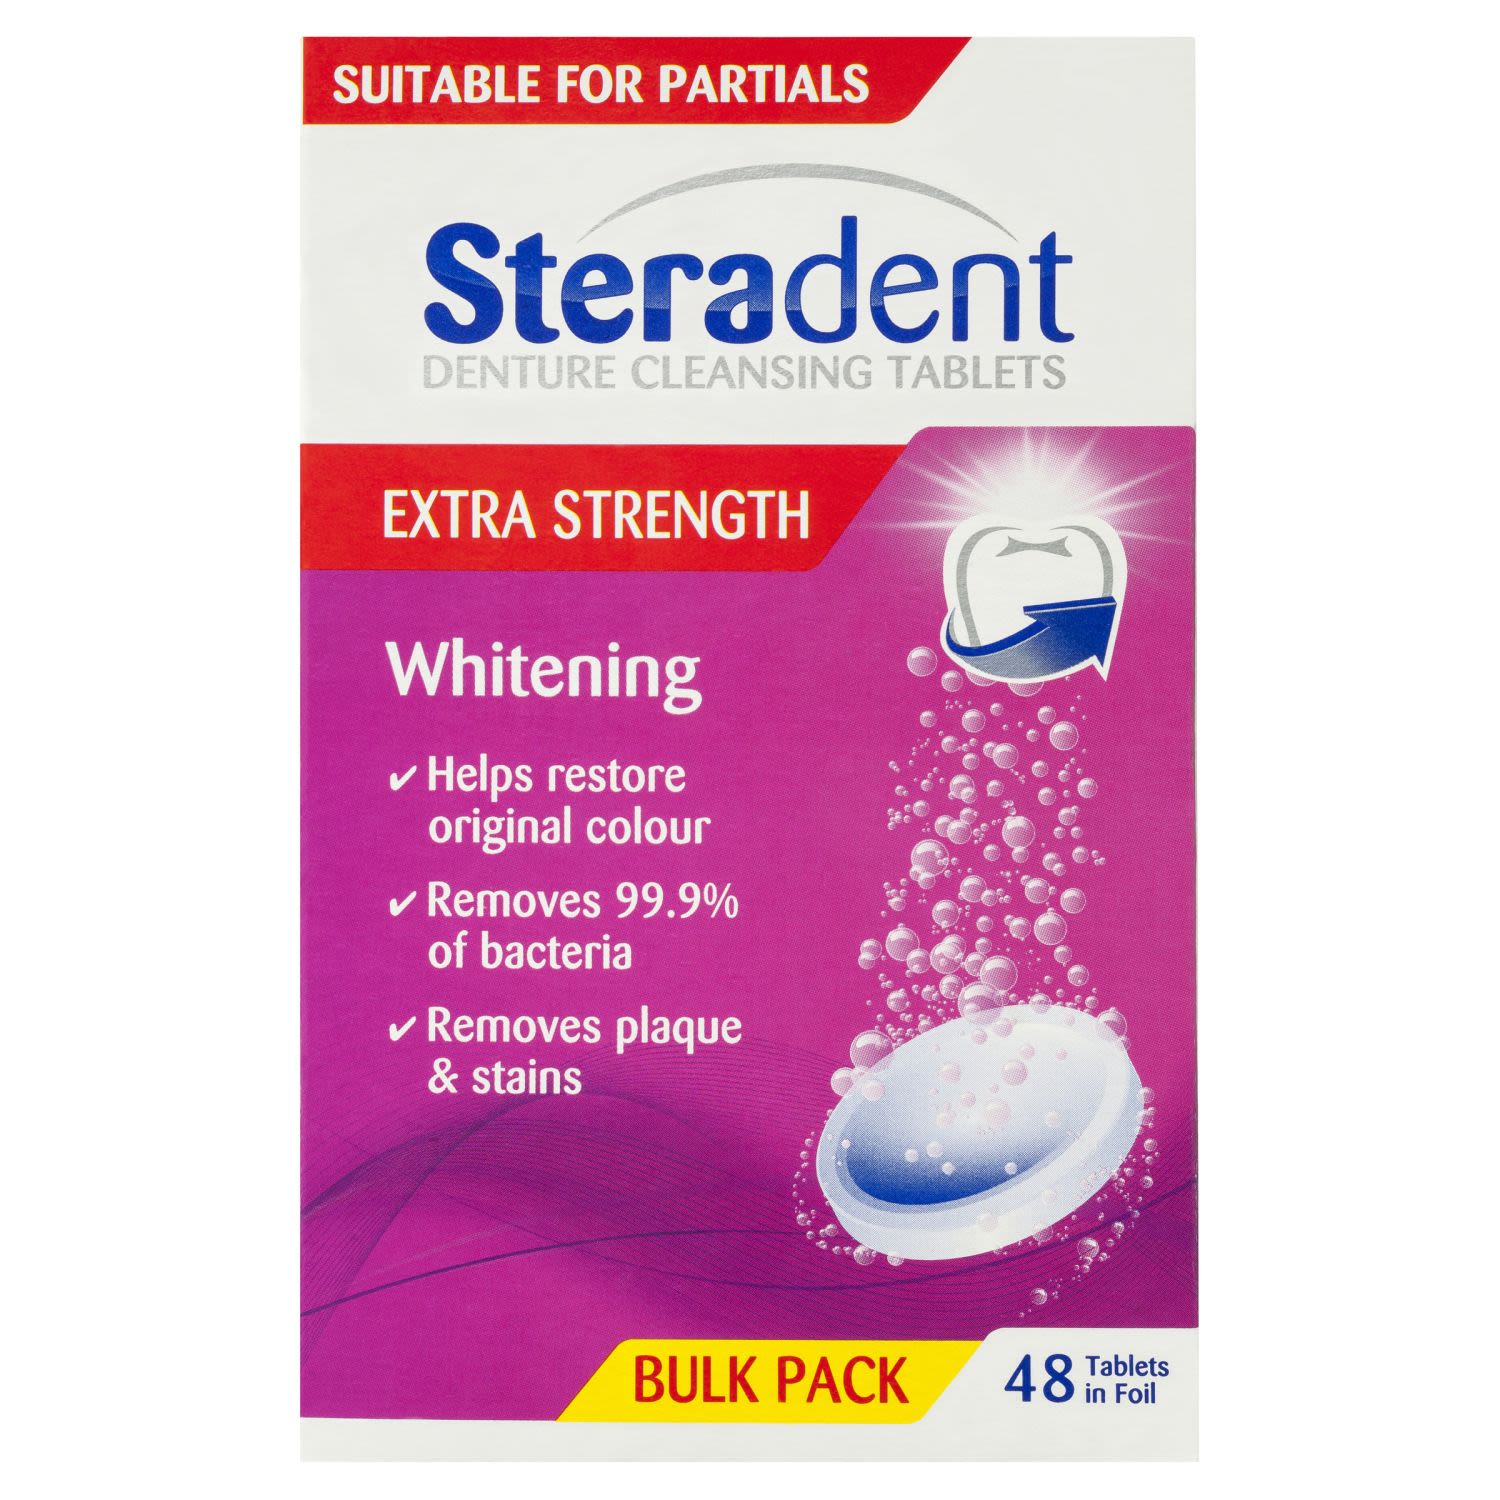 Steradent Denture Cleansing Tablets Arctic Tablets, 48 Each